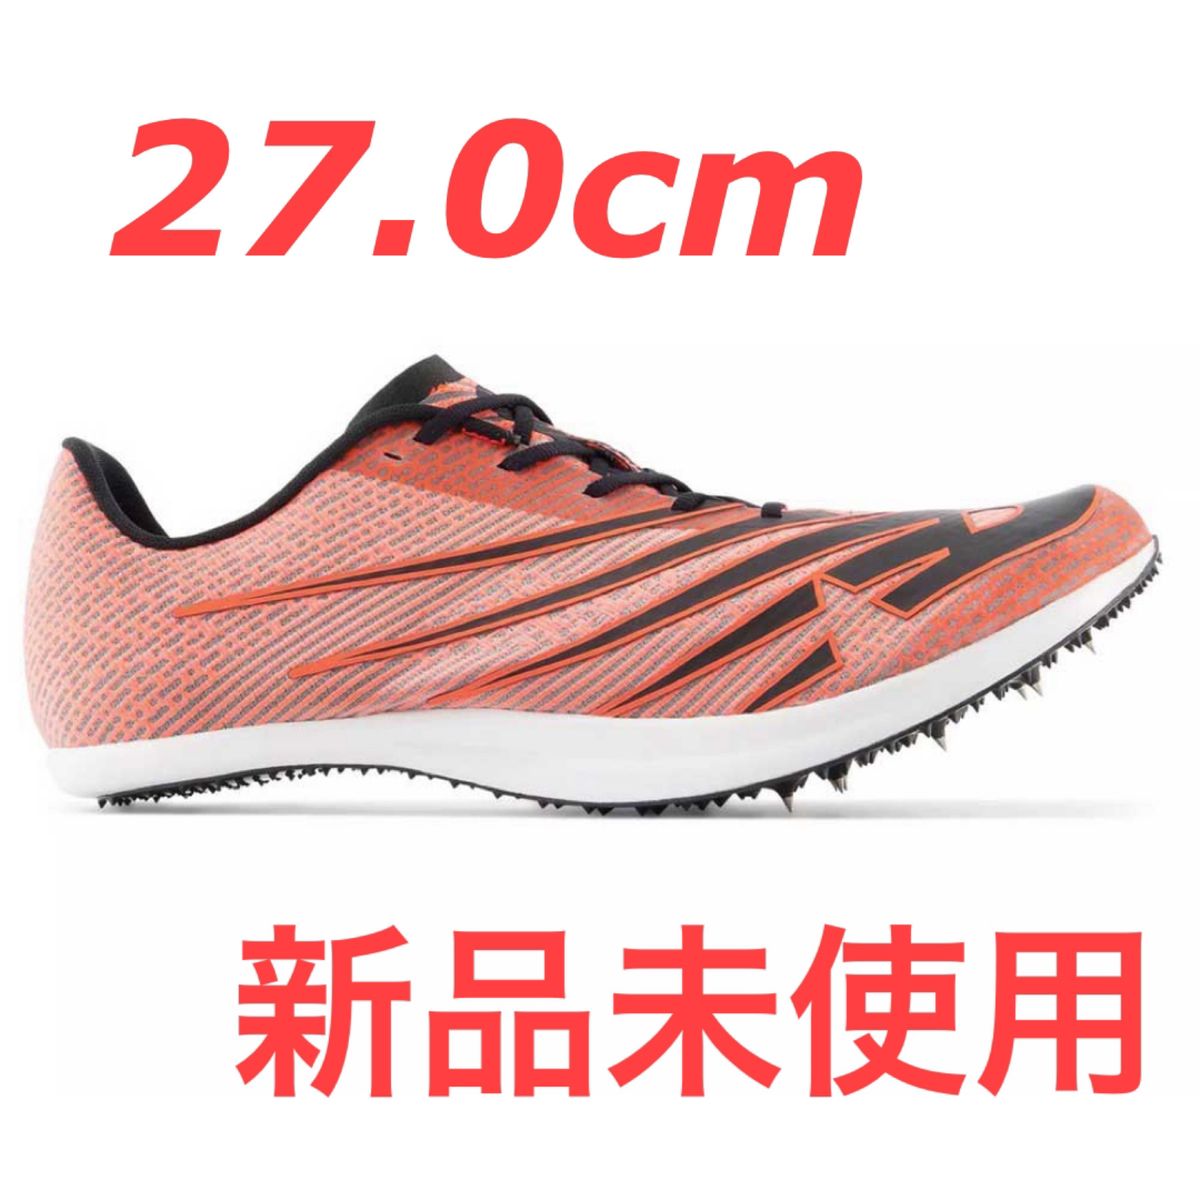 New balance FUELCELL SD-X 27.0cm